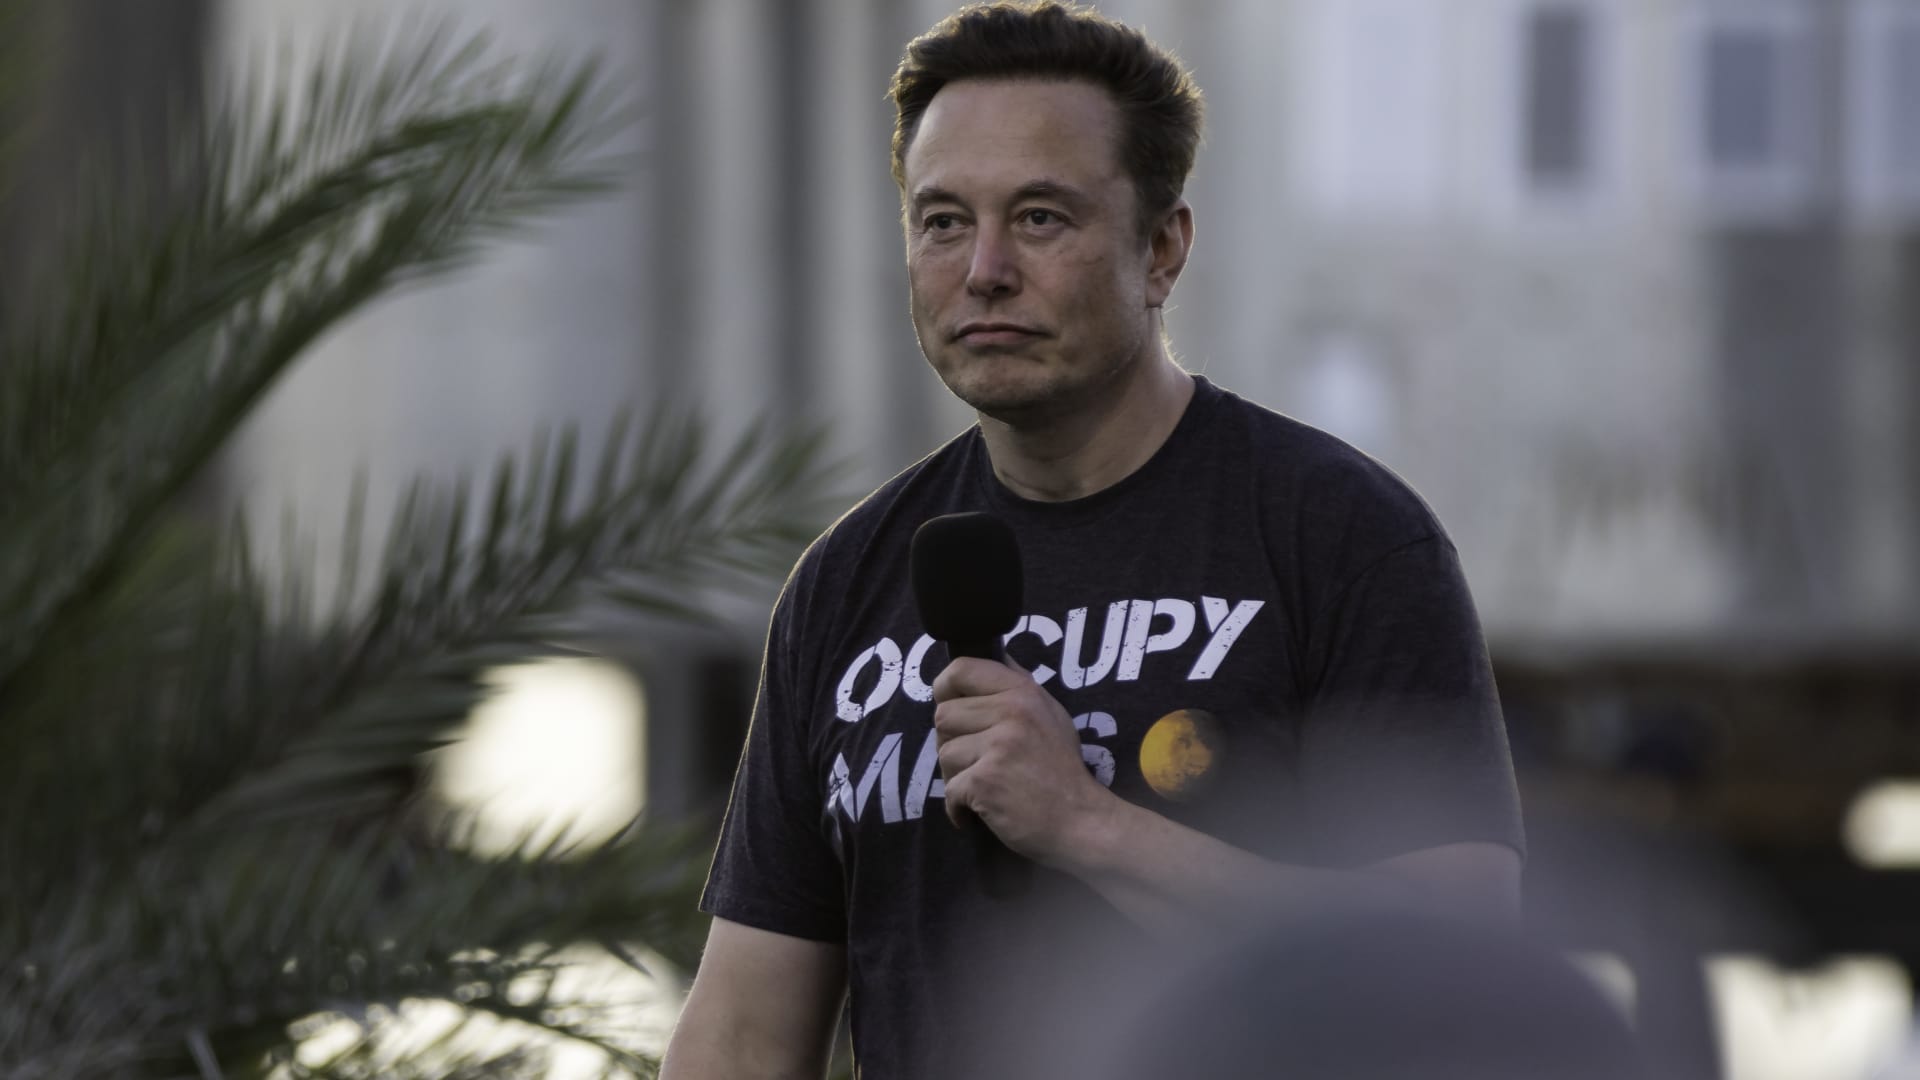 Tesla stock had its worst week since March 2020 amid a wild week for Musk